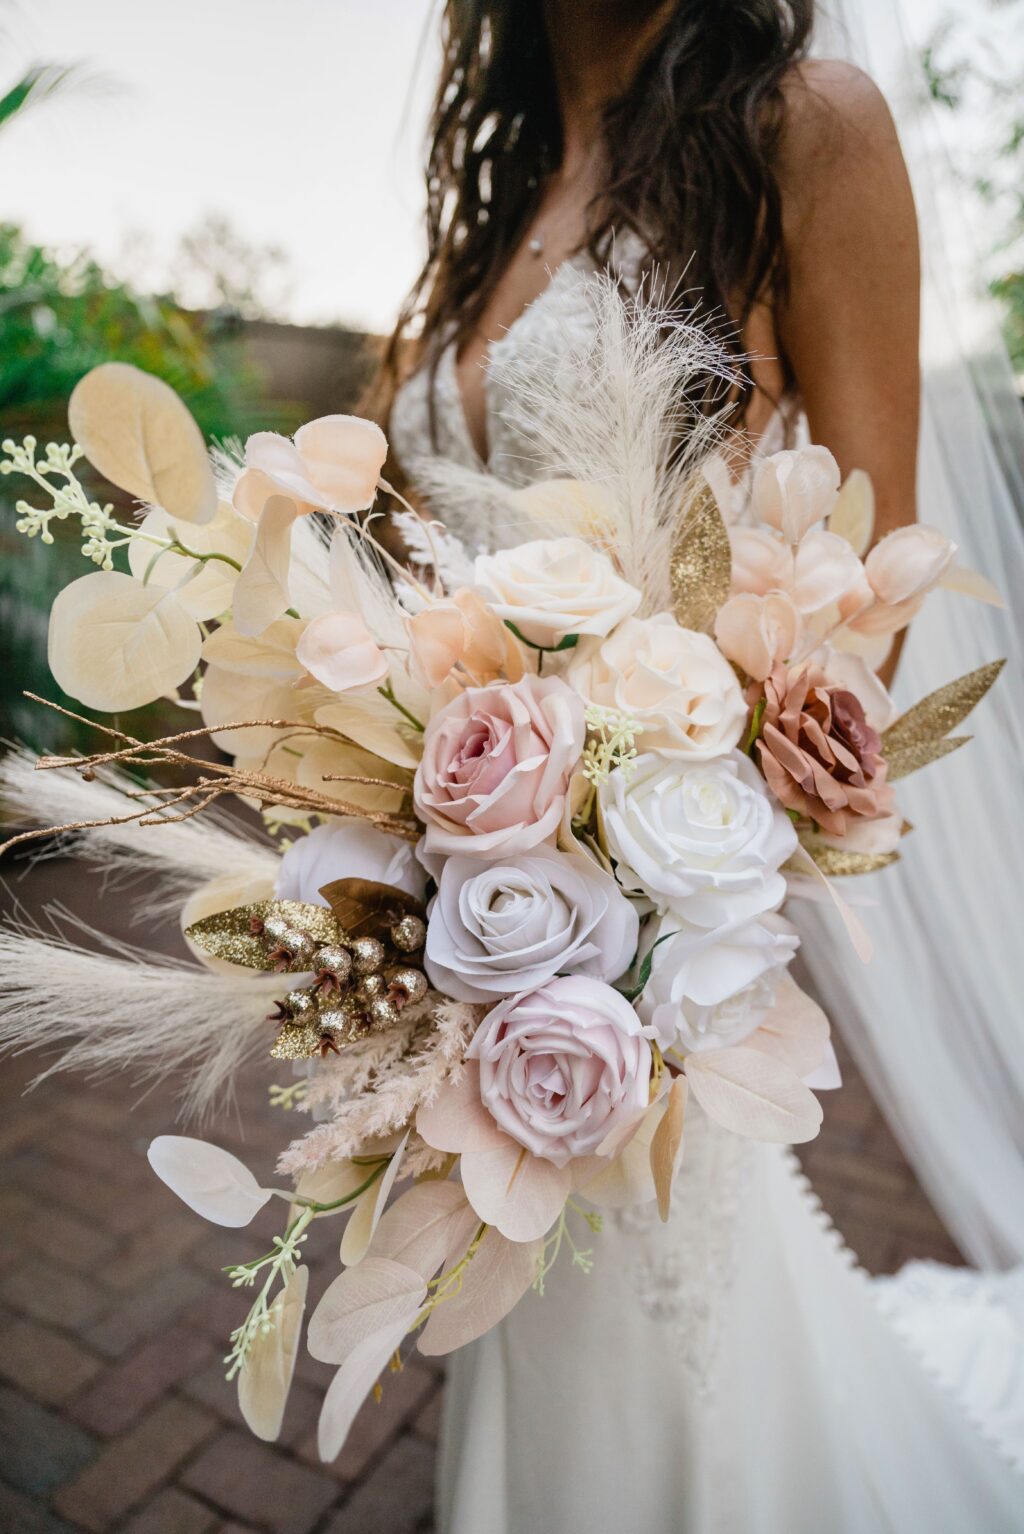 Mix of Dried and Live Florals in Blush and Beige Roses Boho Bridal Wedding Bouquet Inspiration